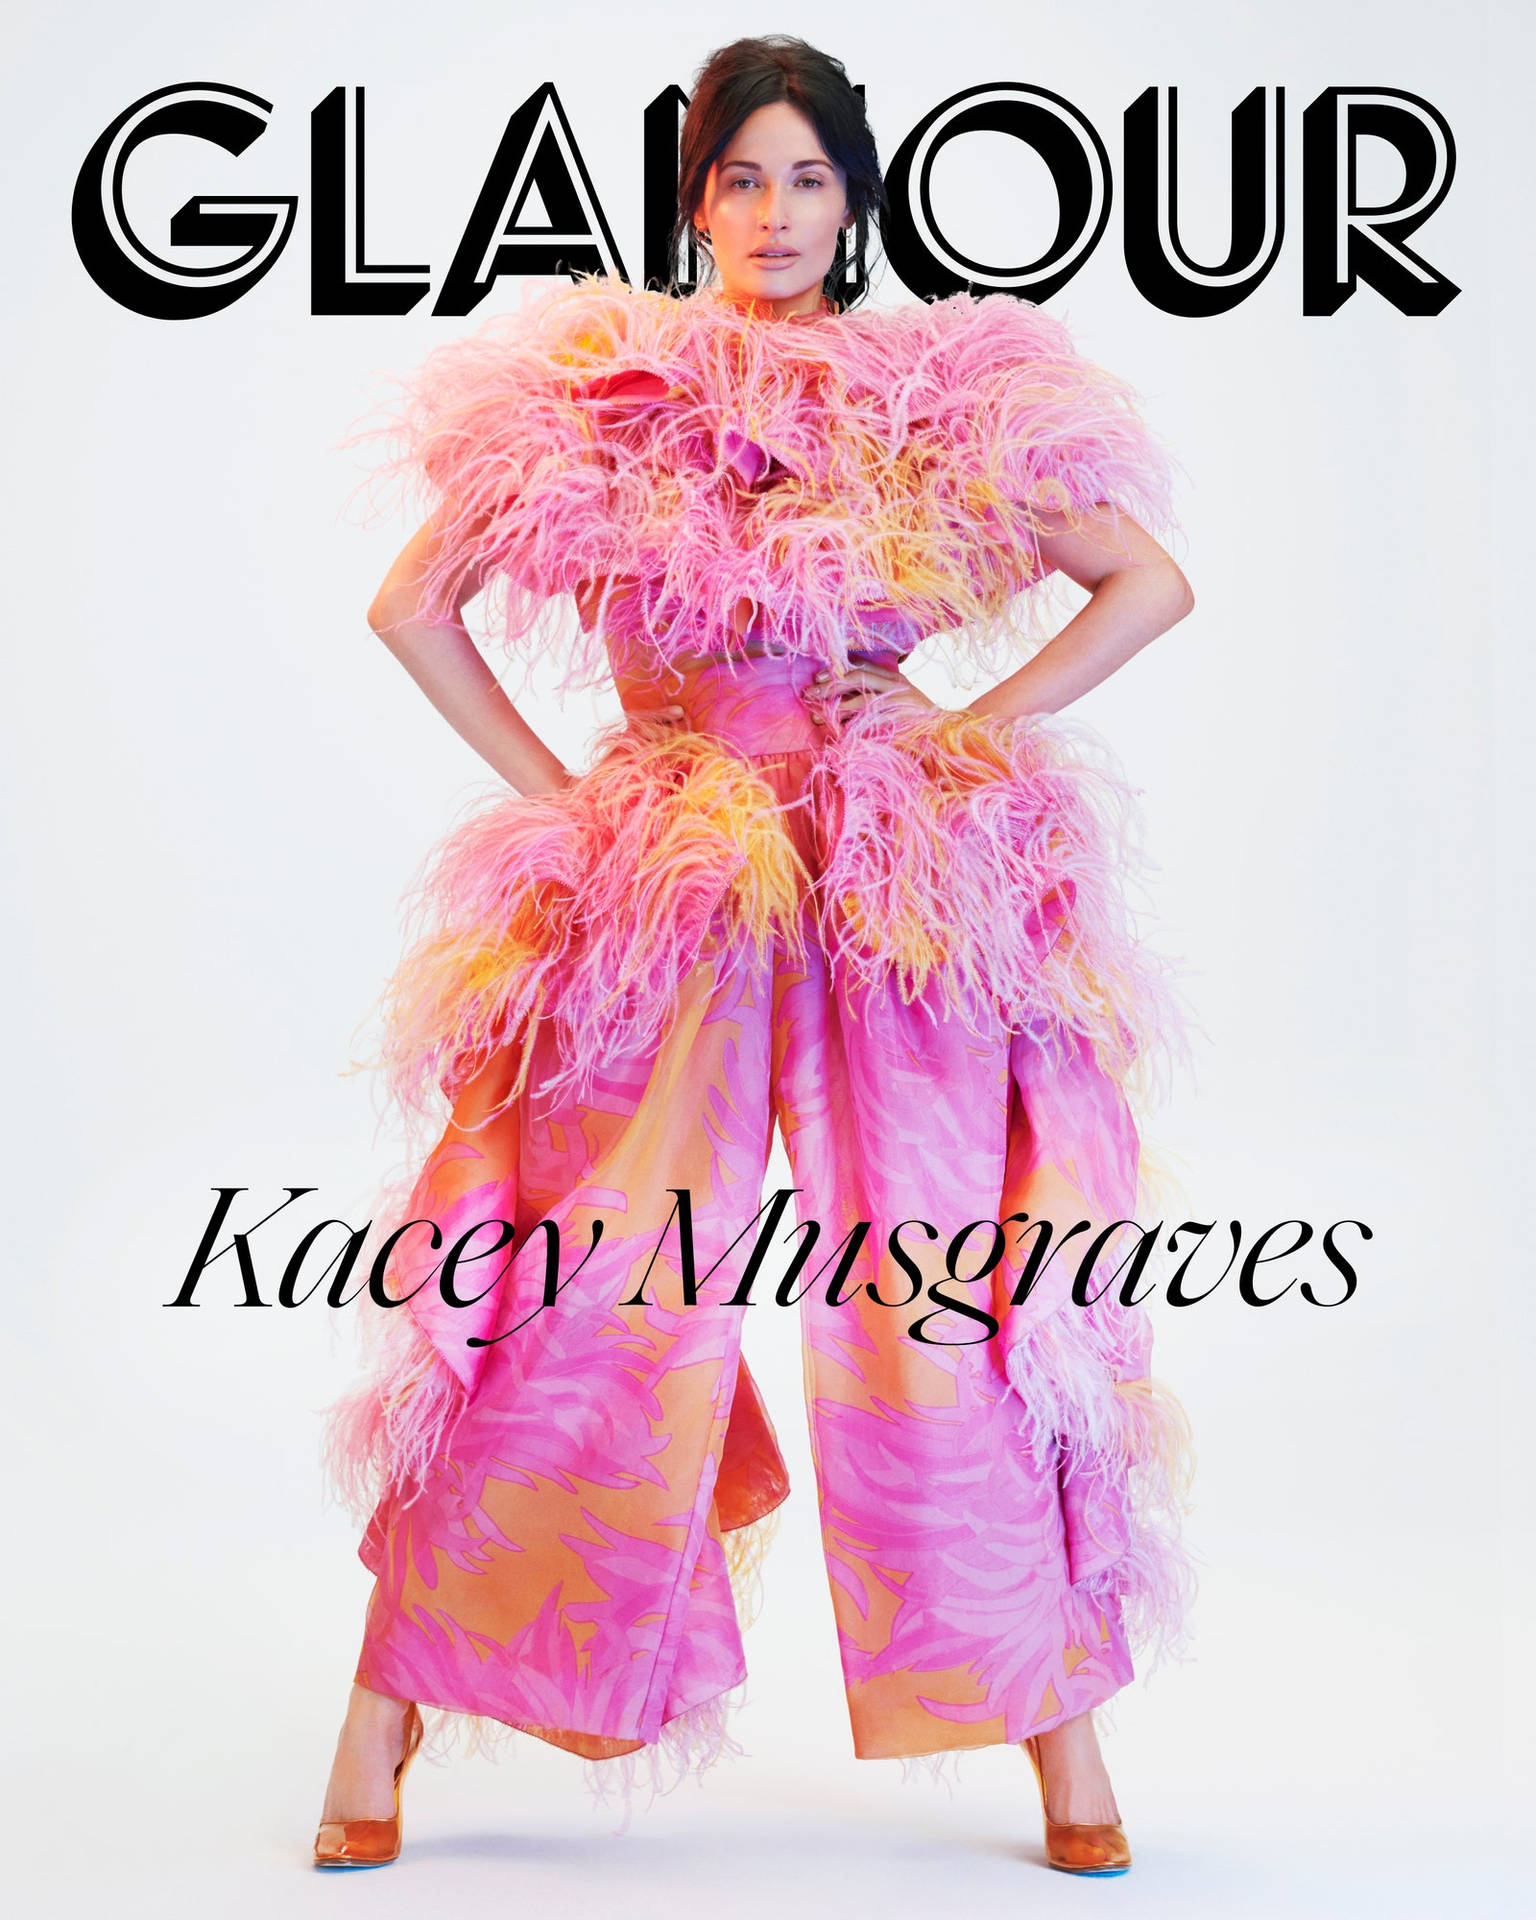 Kacey Musgraves Glamour Pictorial Wallpaper